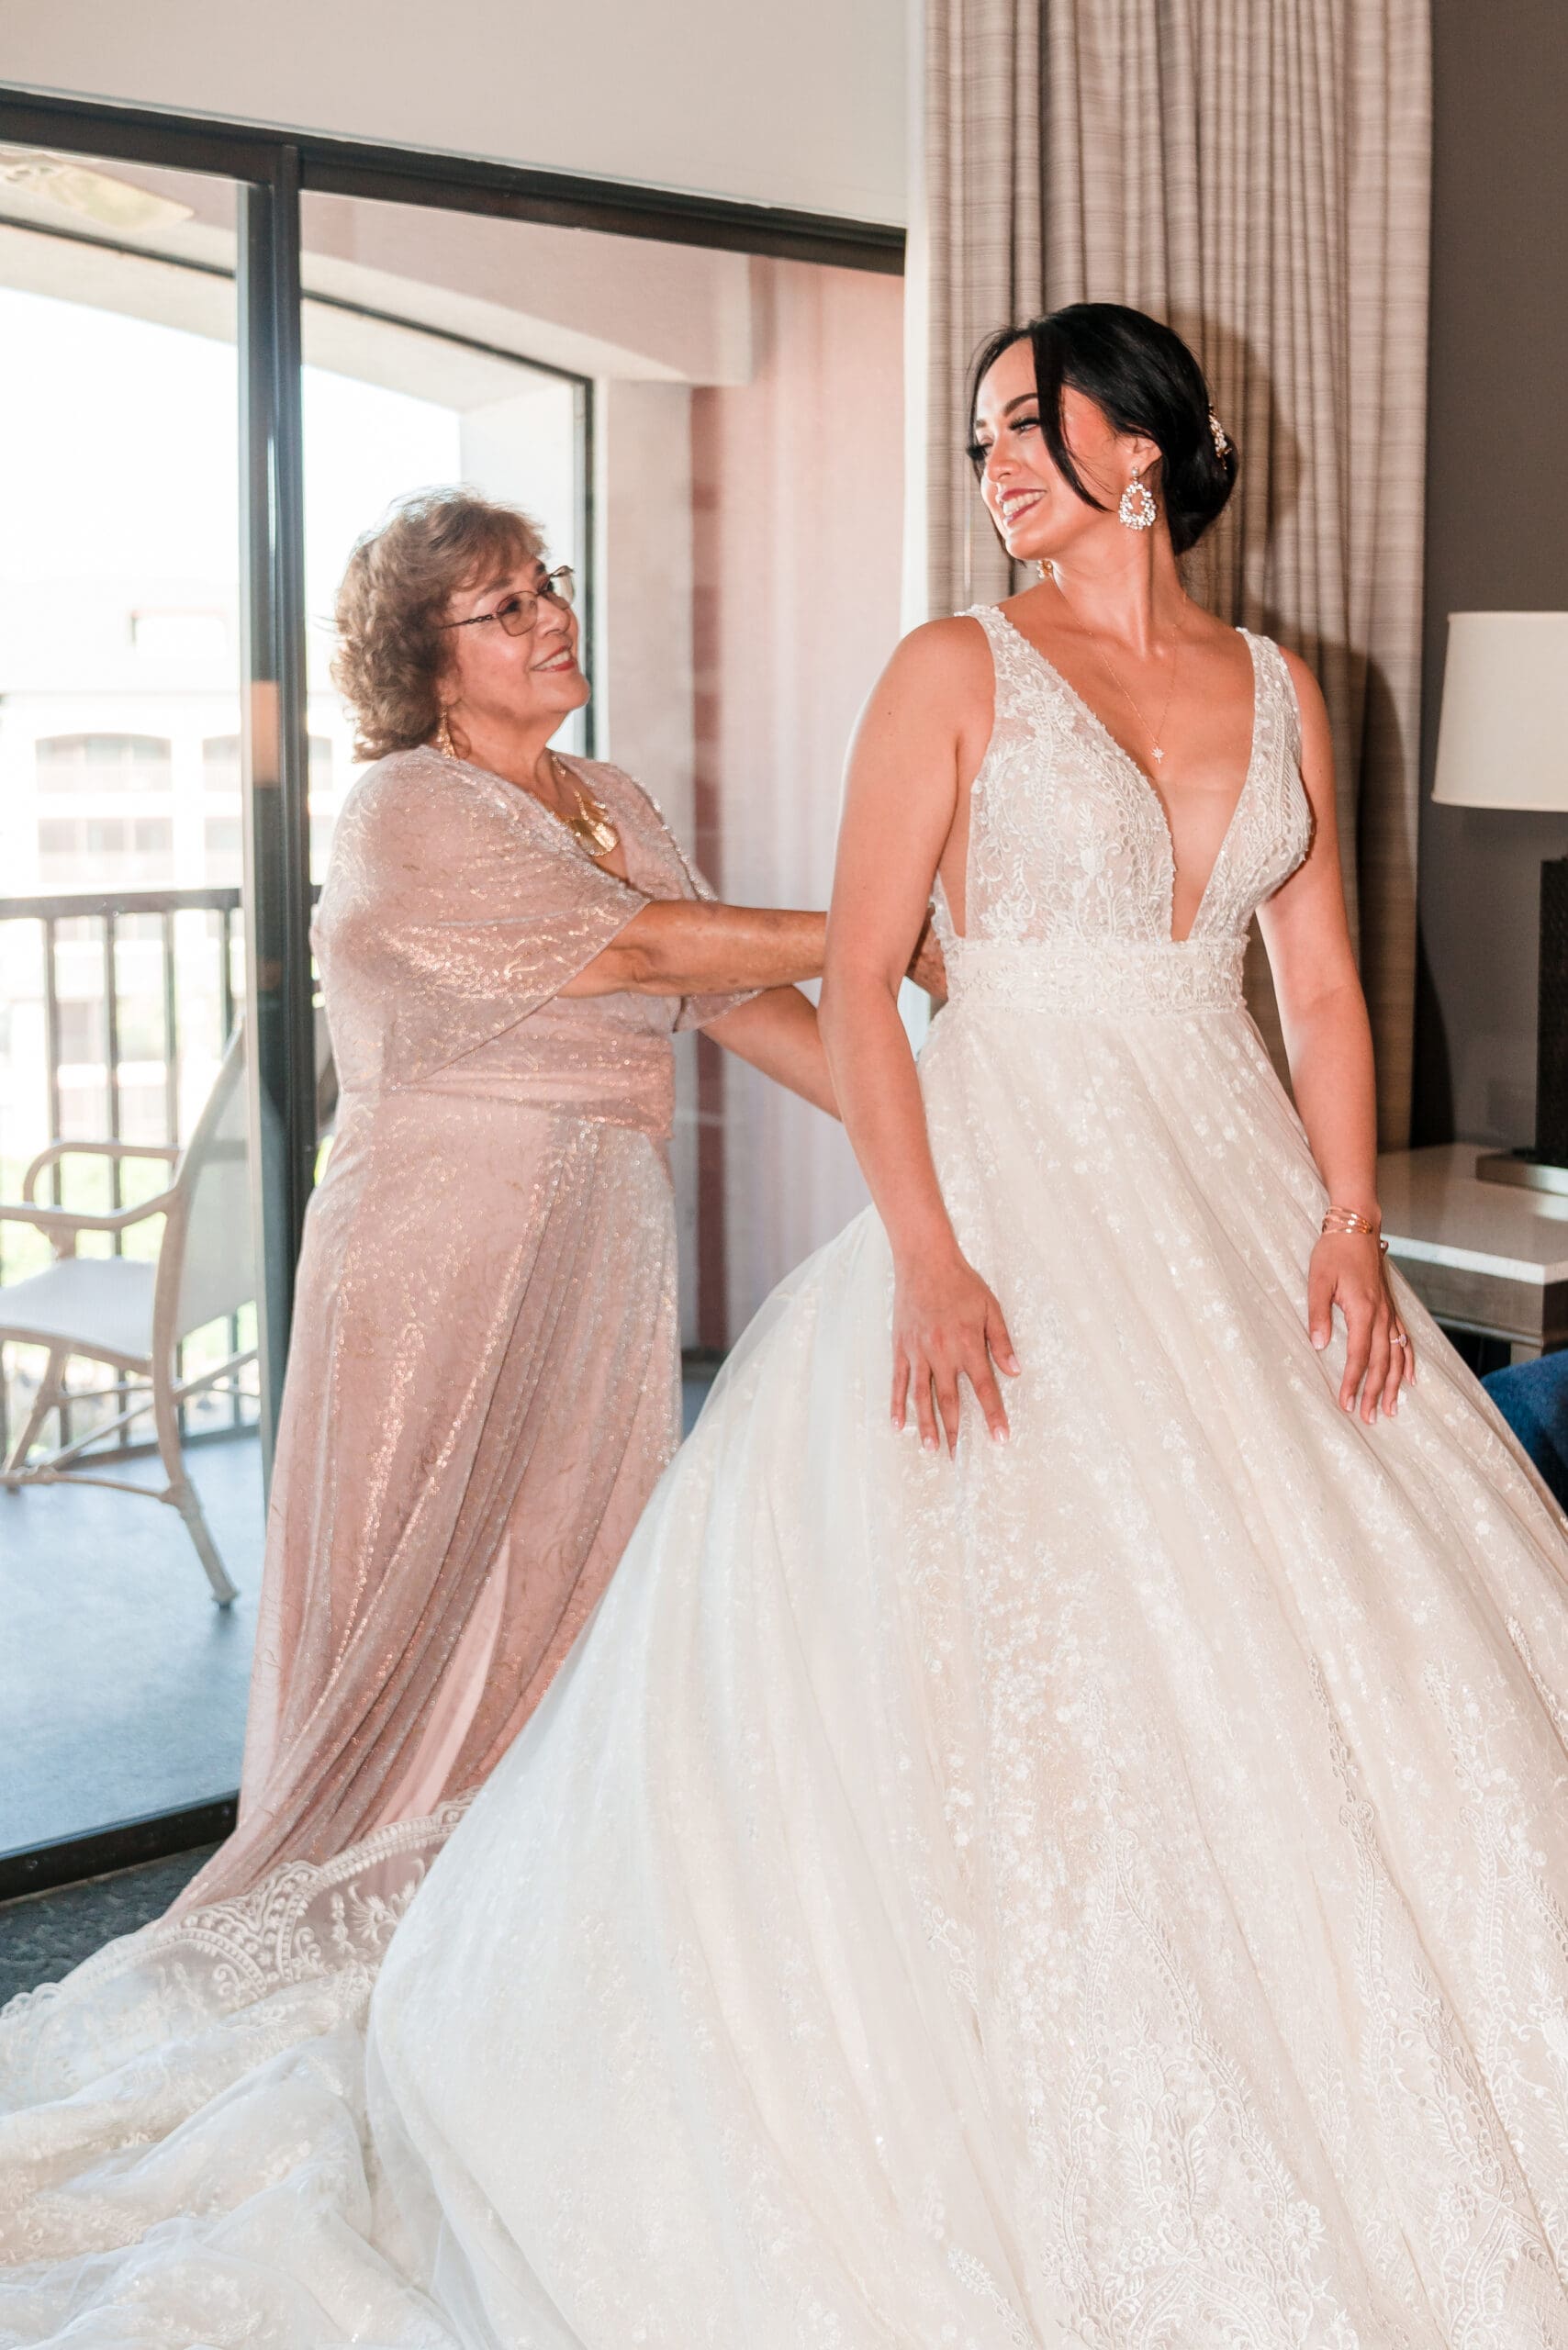 Jessica's mom zipping up her dress in the bridal suite, both smiling and looking at each other